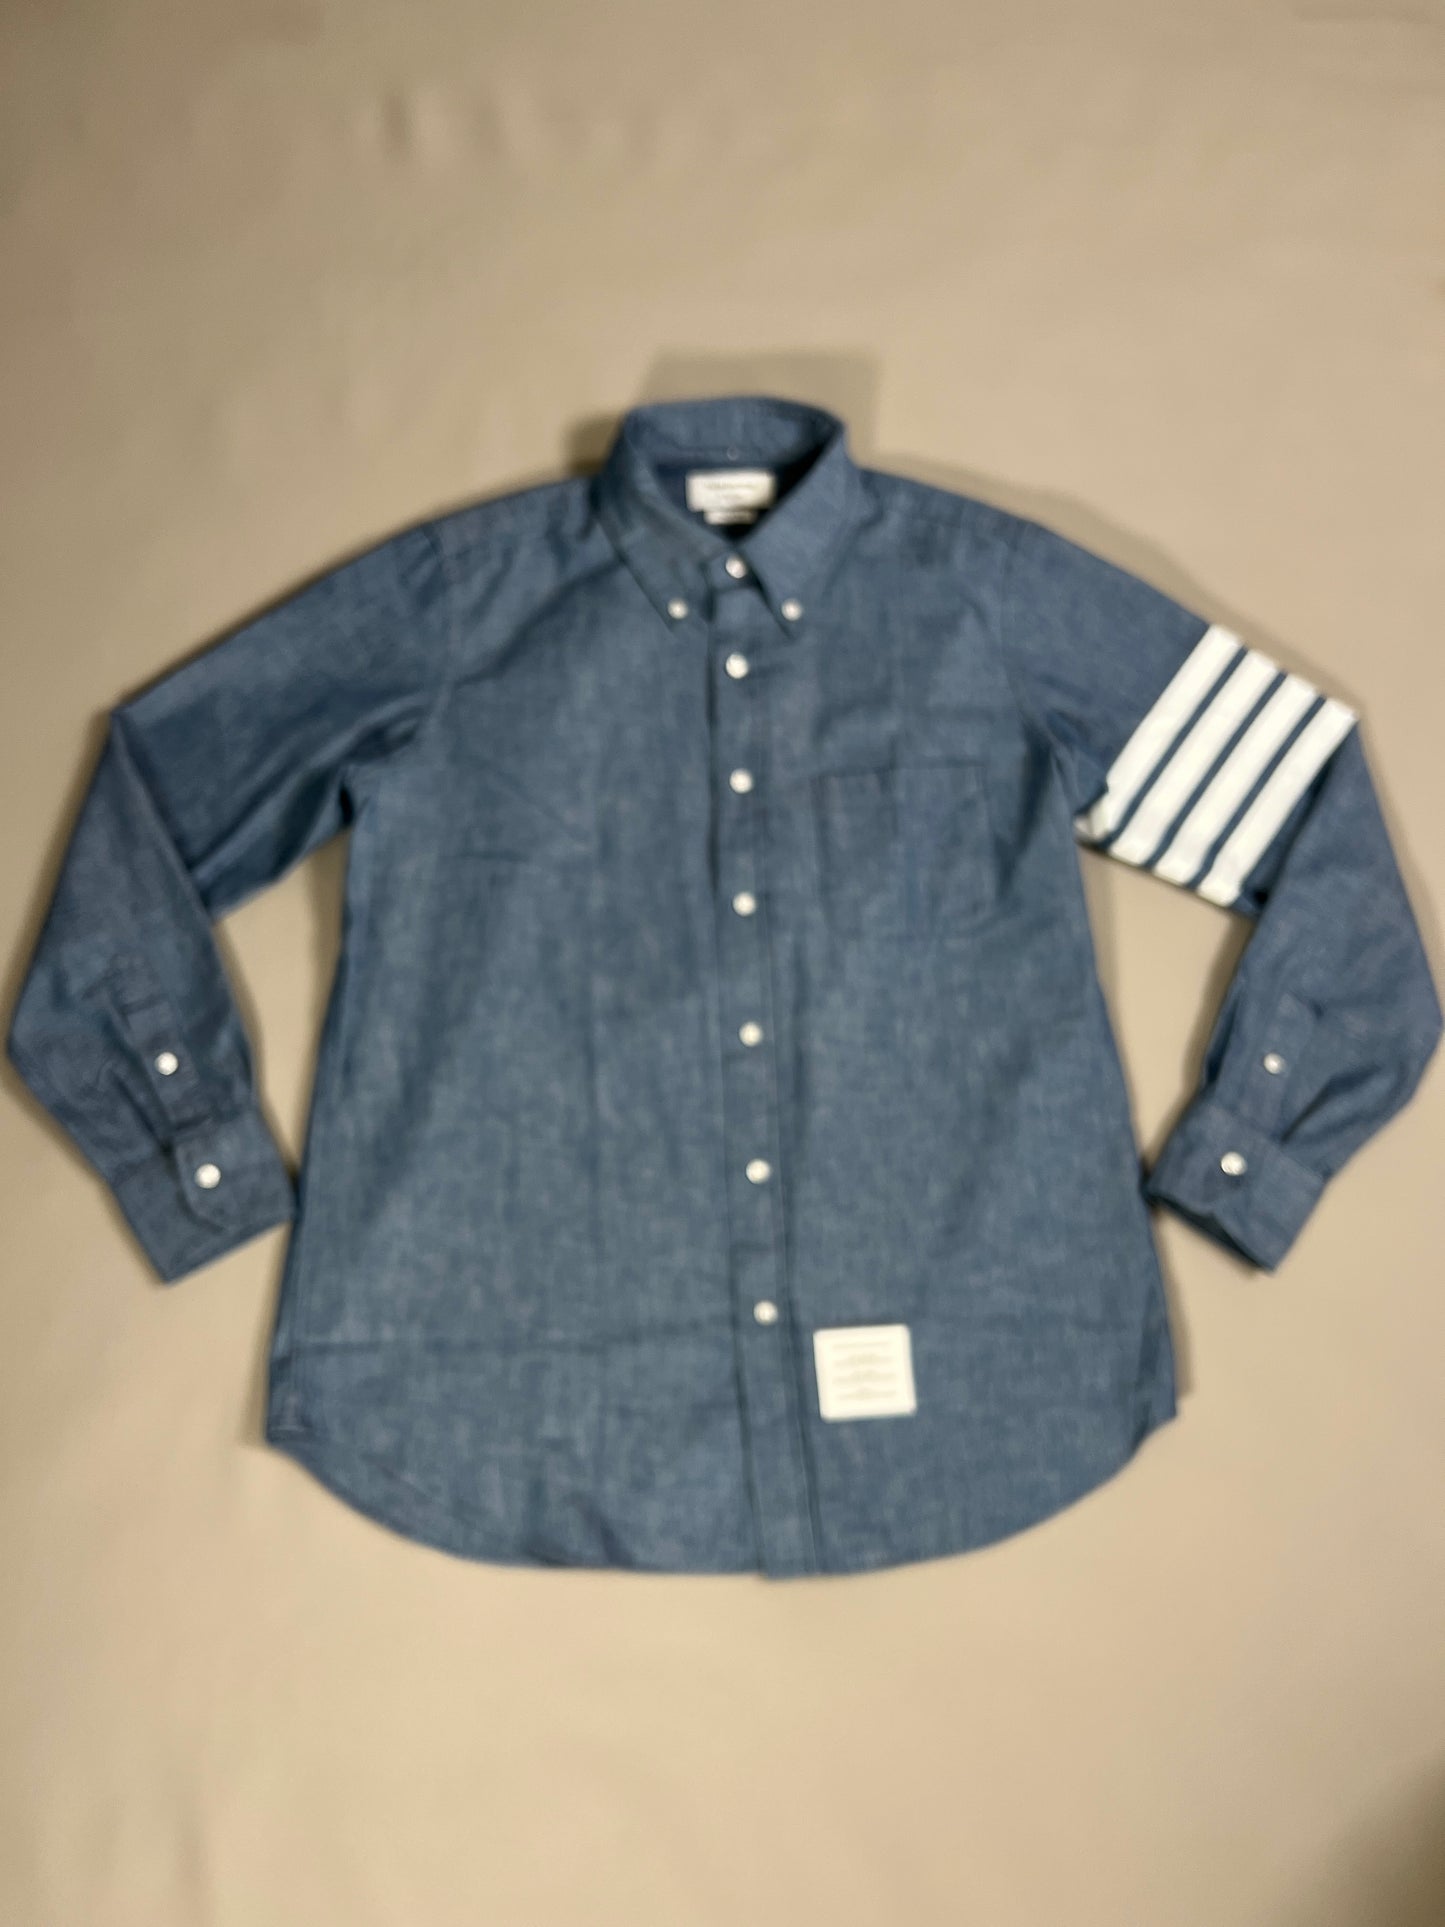 THOM BROWNE Straight Fit Button-Down Long Sleeve Shirt w/printed 4 Bar Sleeve in Chambray Blue Size 3 (NEW)